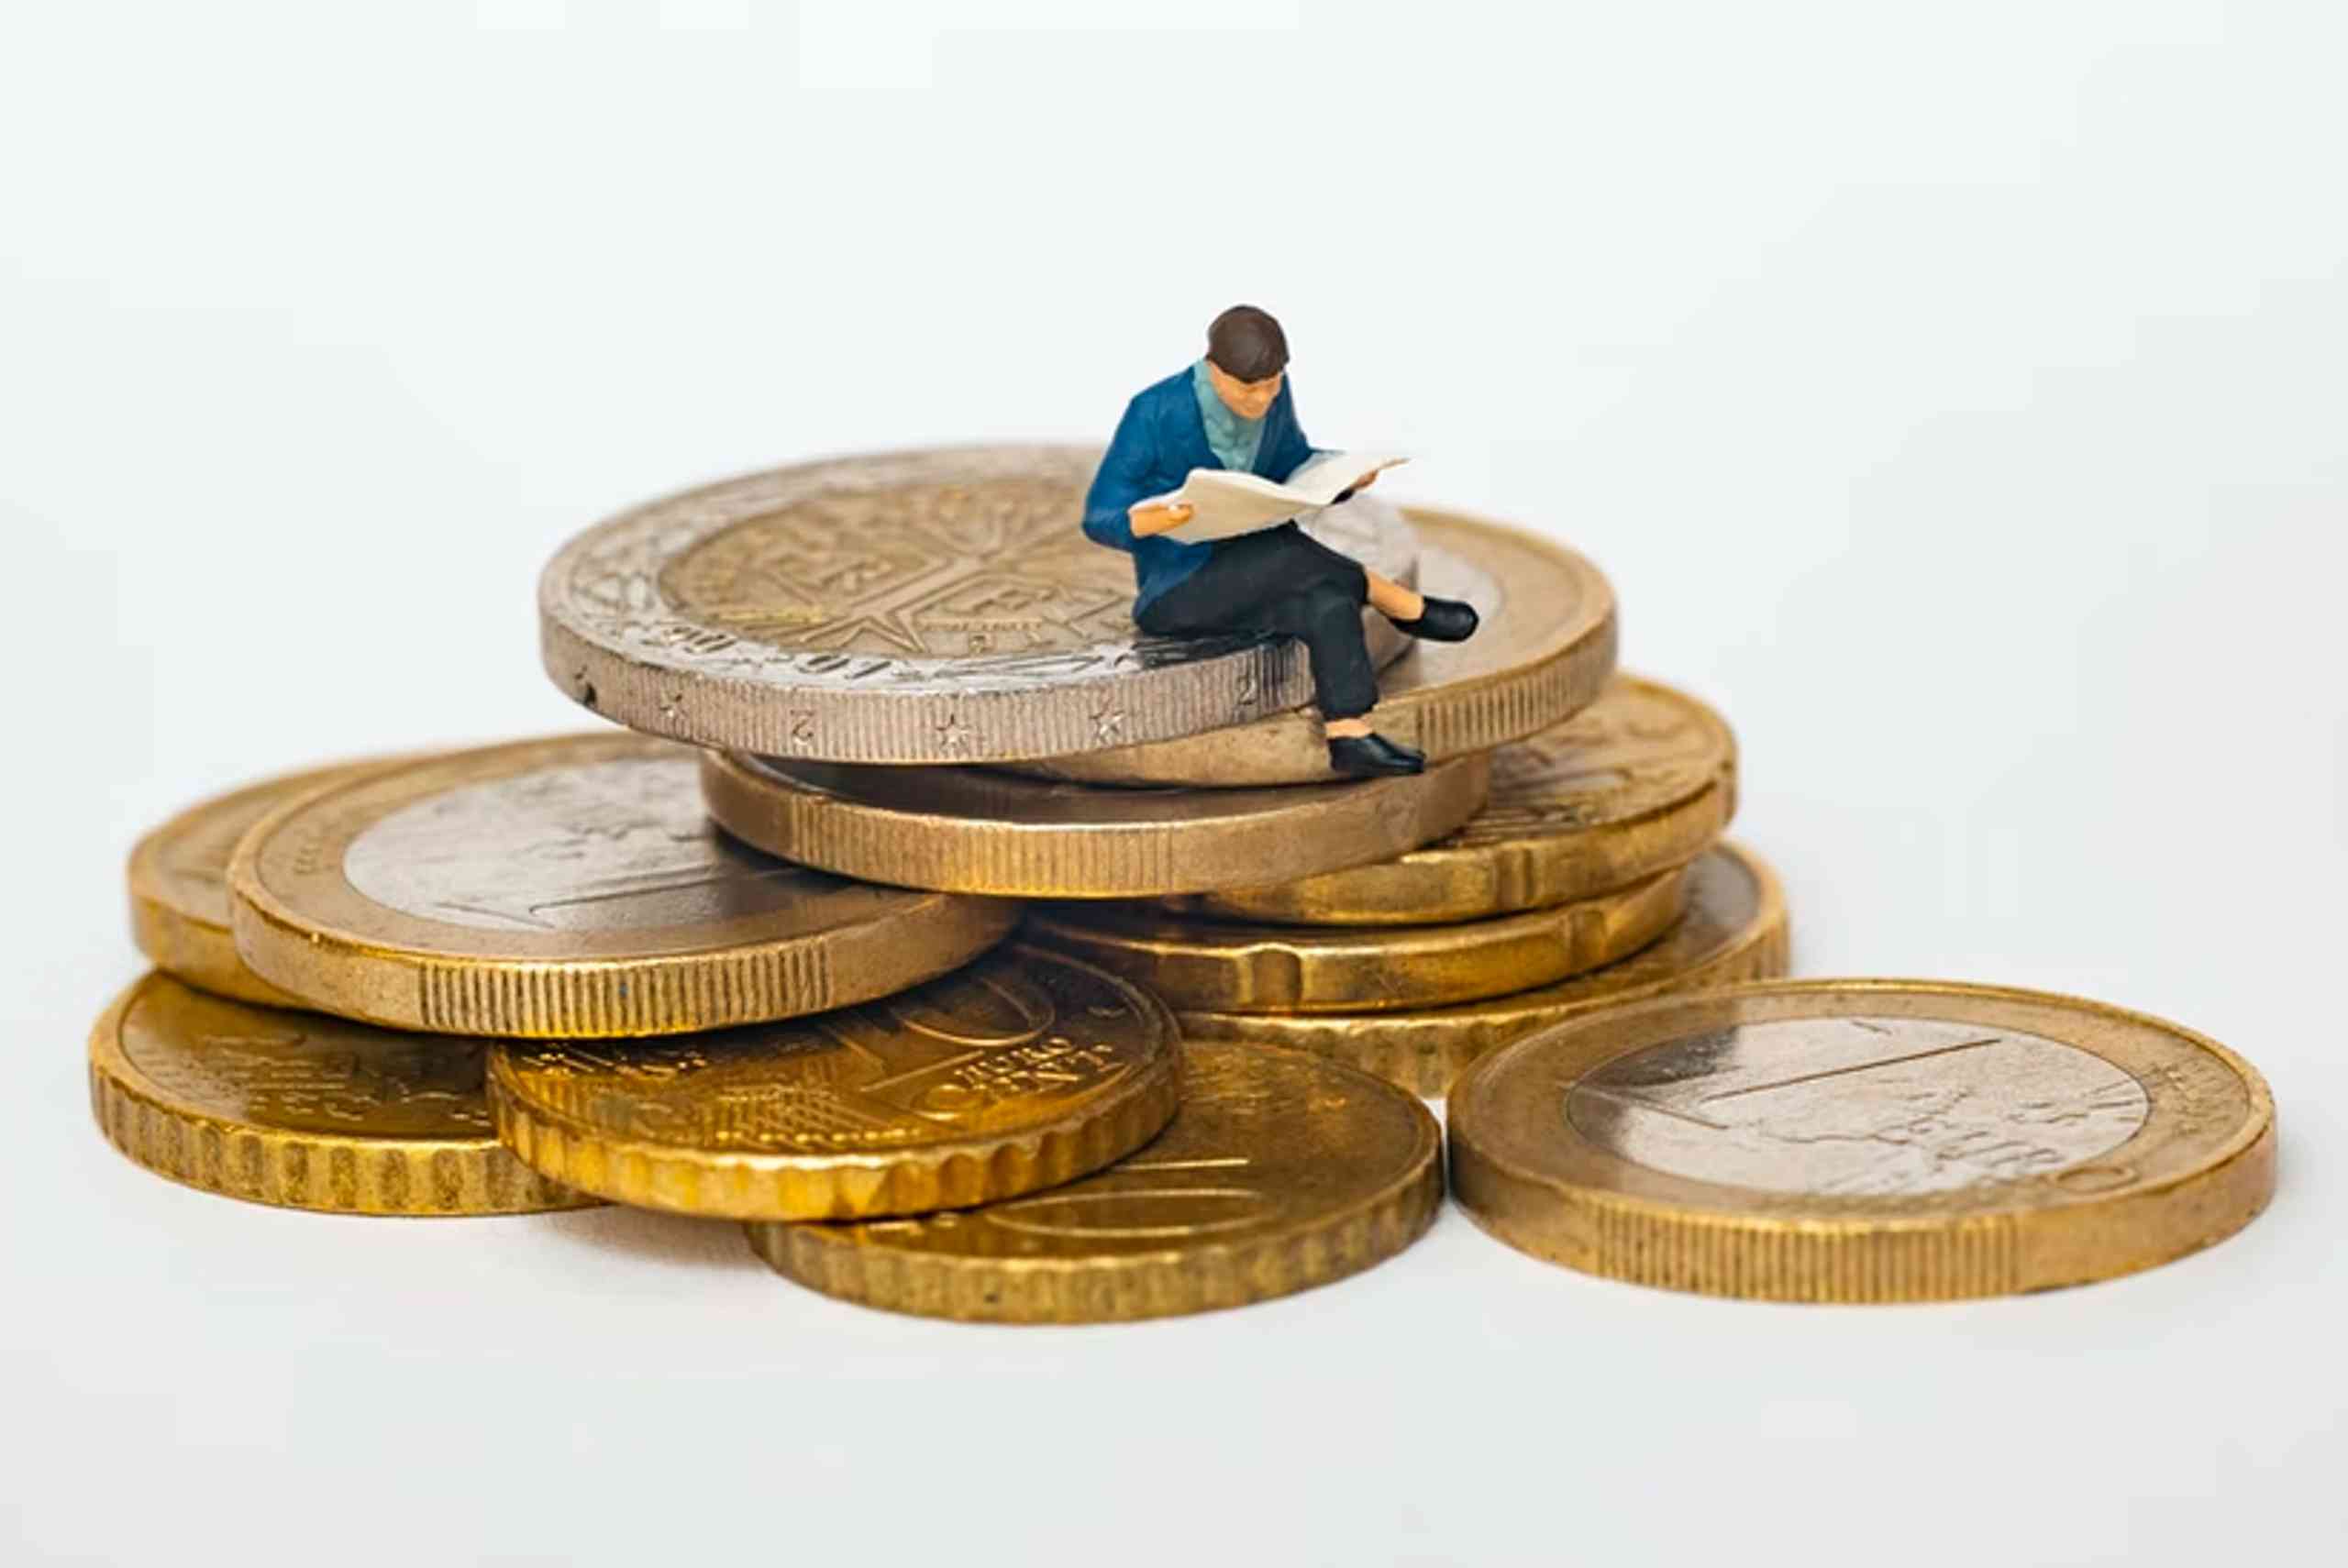 figure sitting on coins